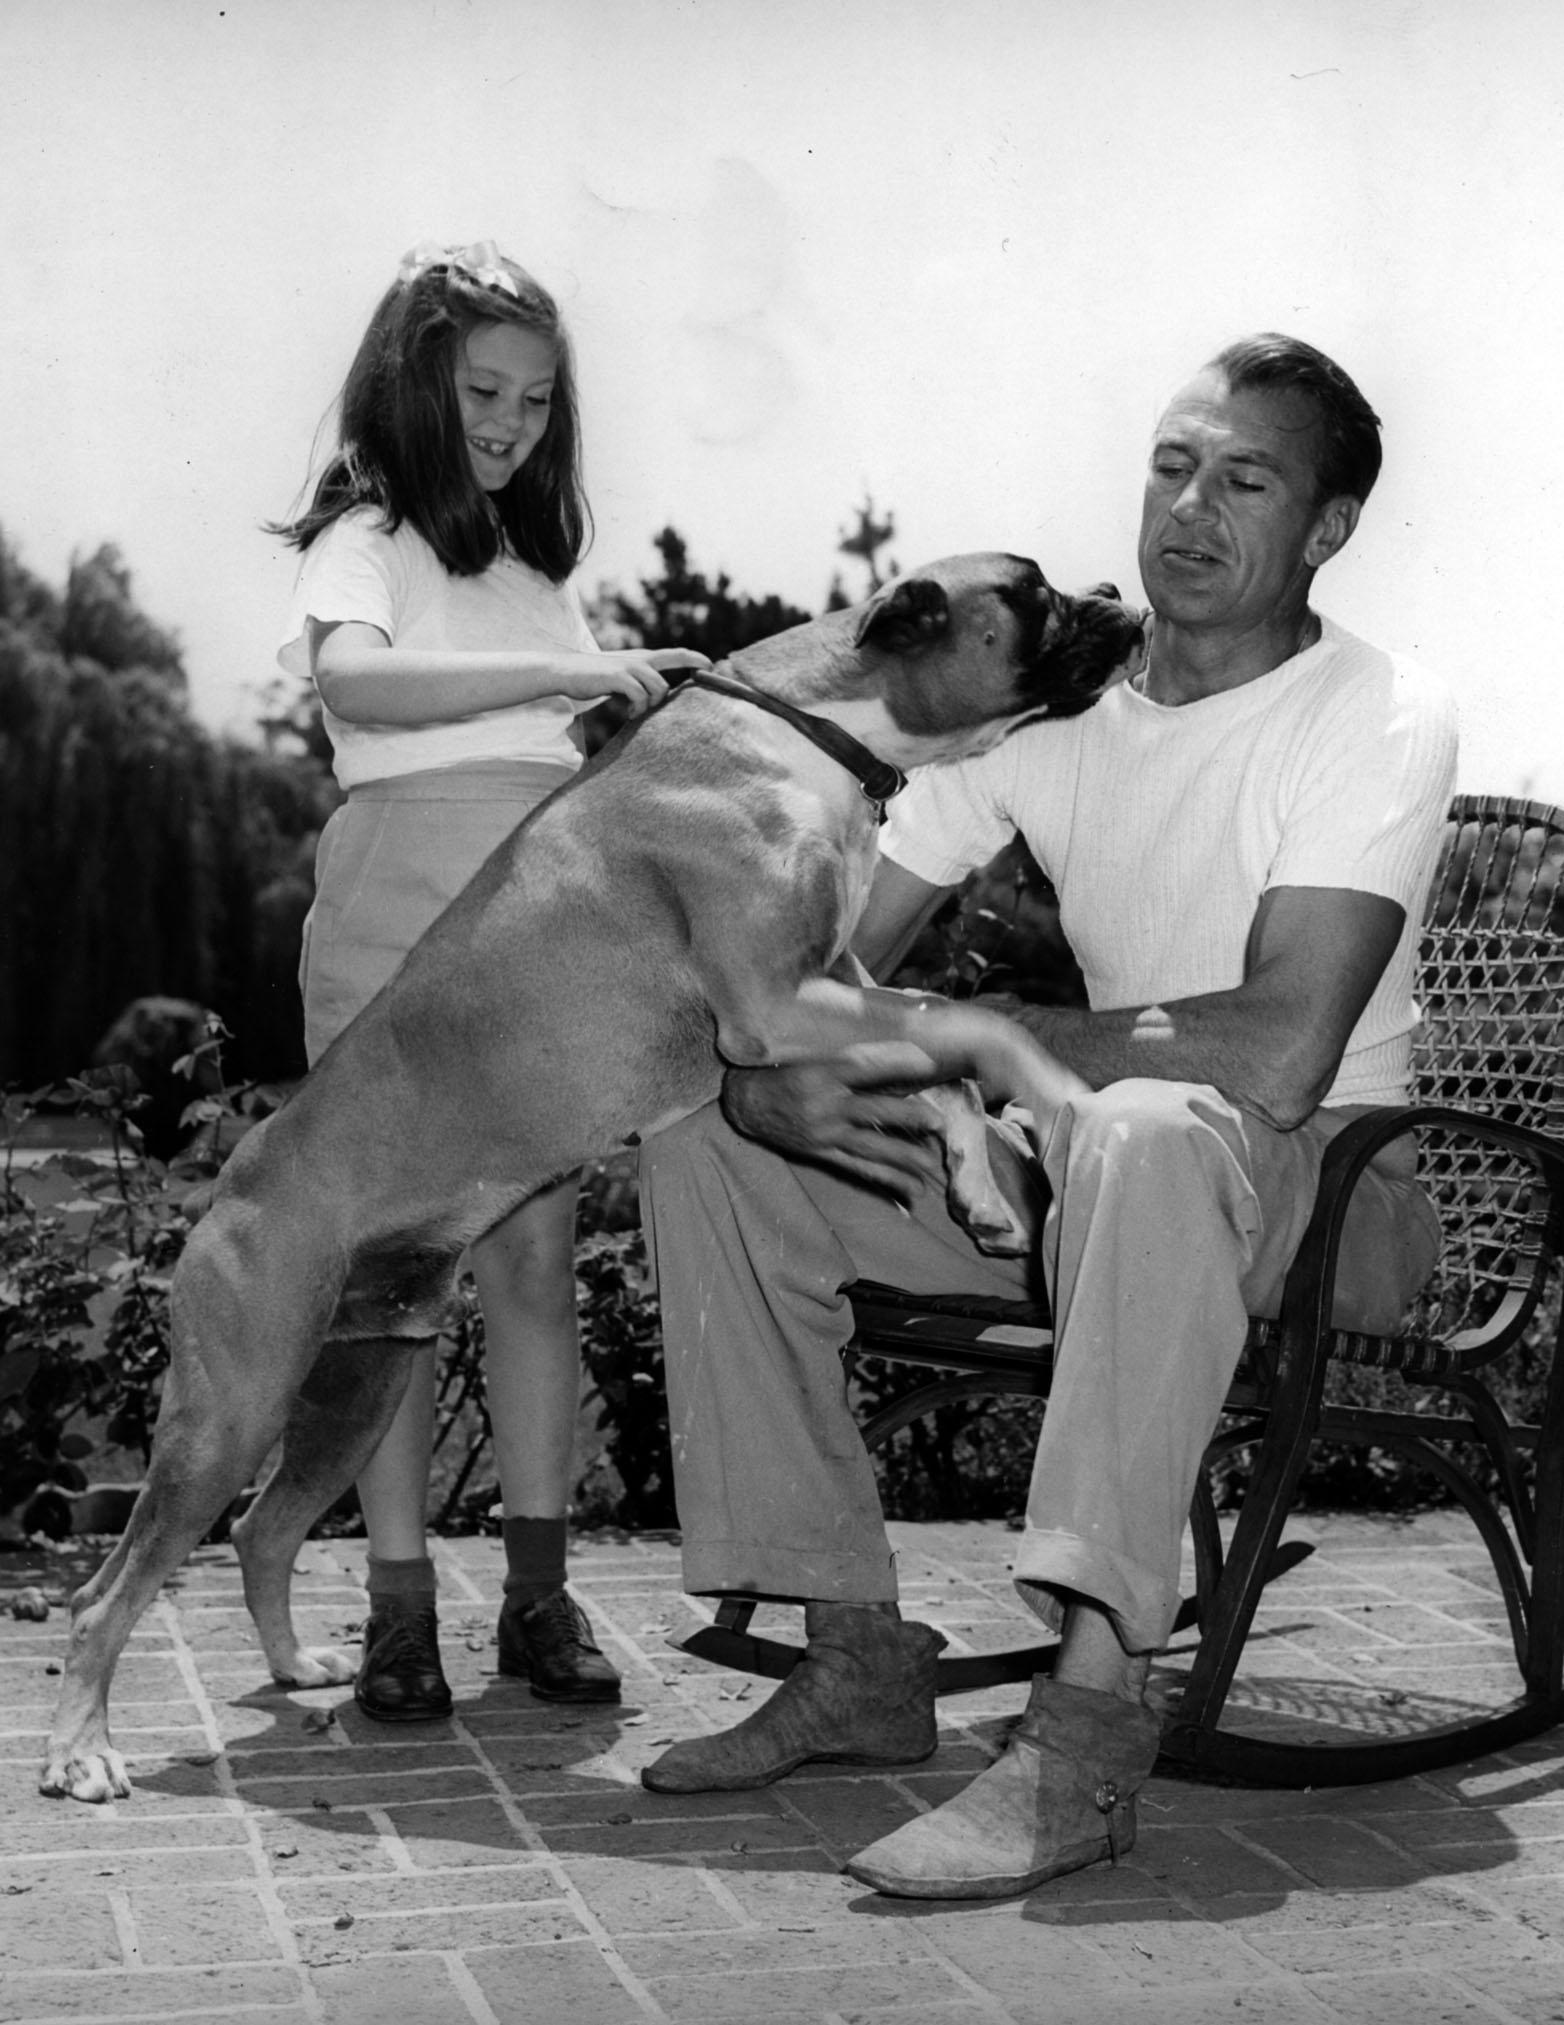 Gary Cooper with his daughter and dog, circa 1945.